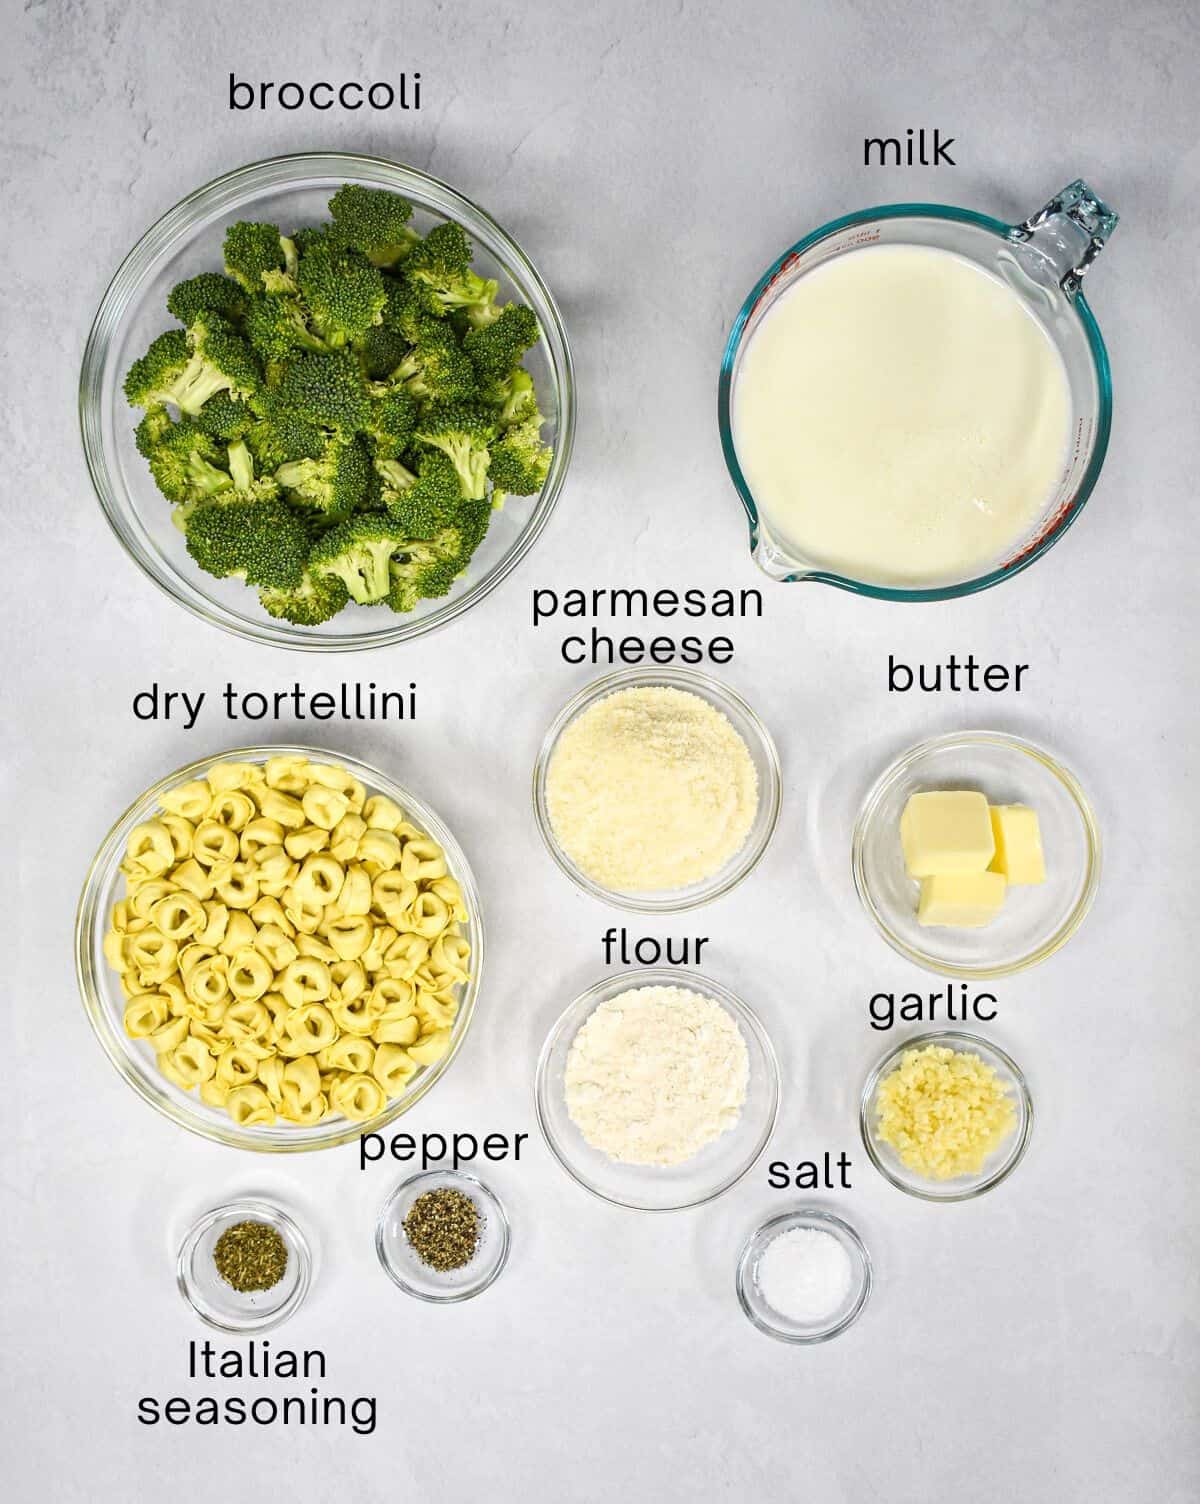 The ingredients for the pasta dish prepped and arranged in glass bowls with each labled with small black letters.